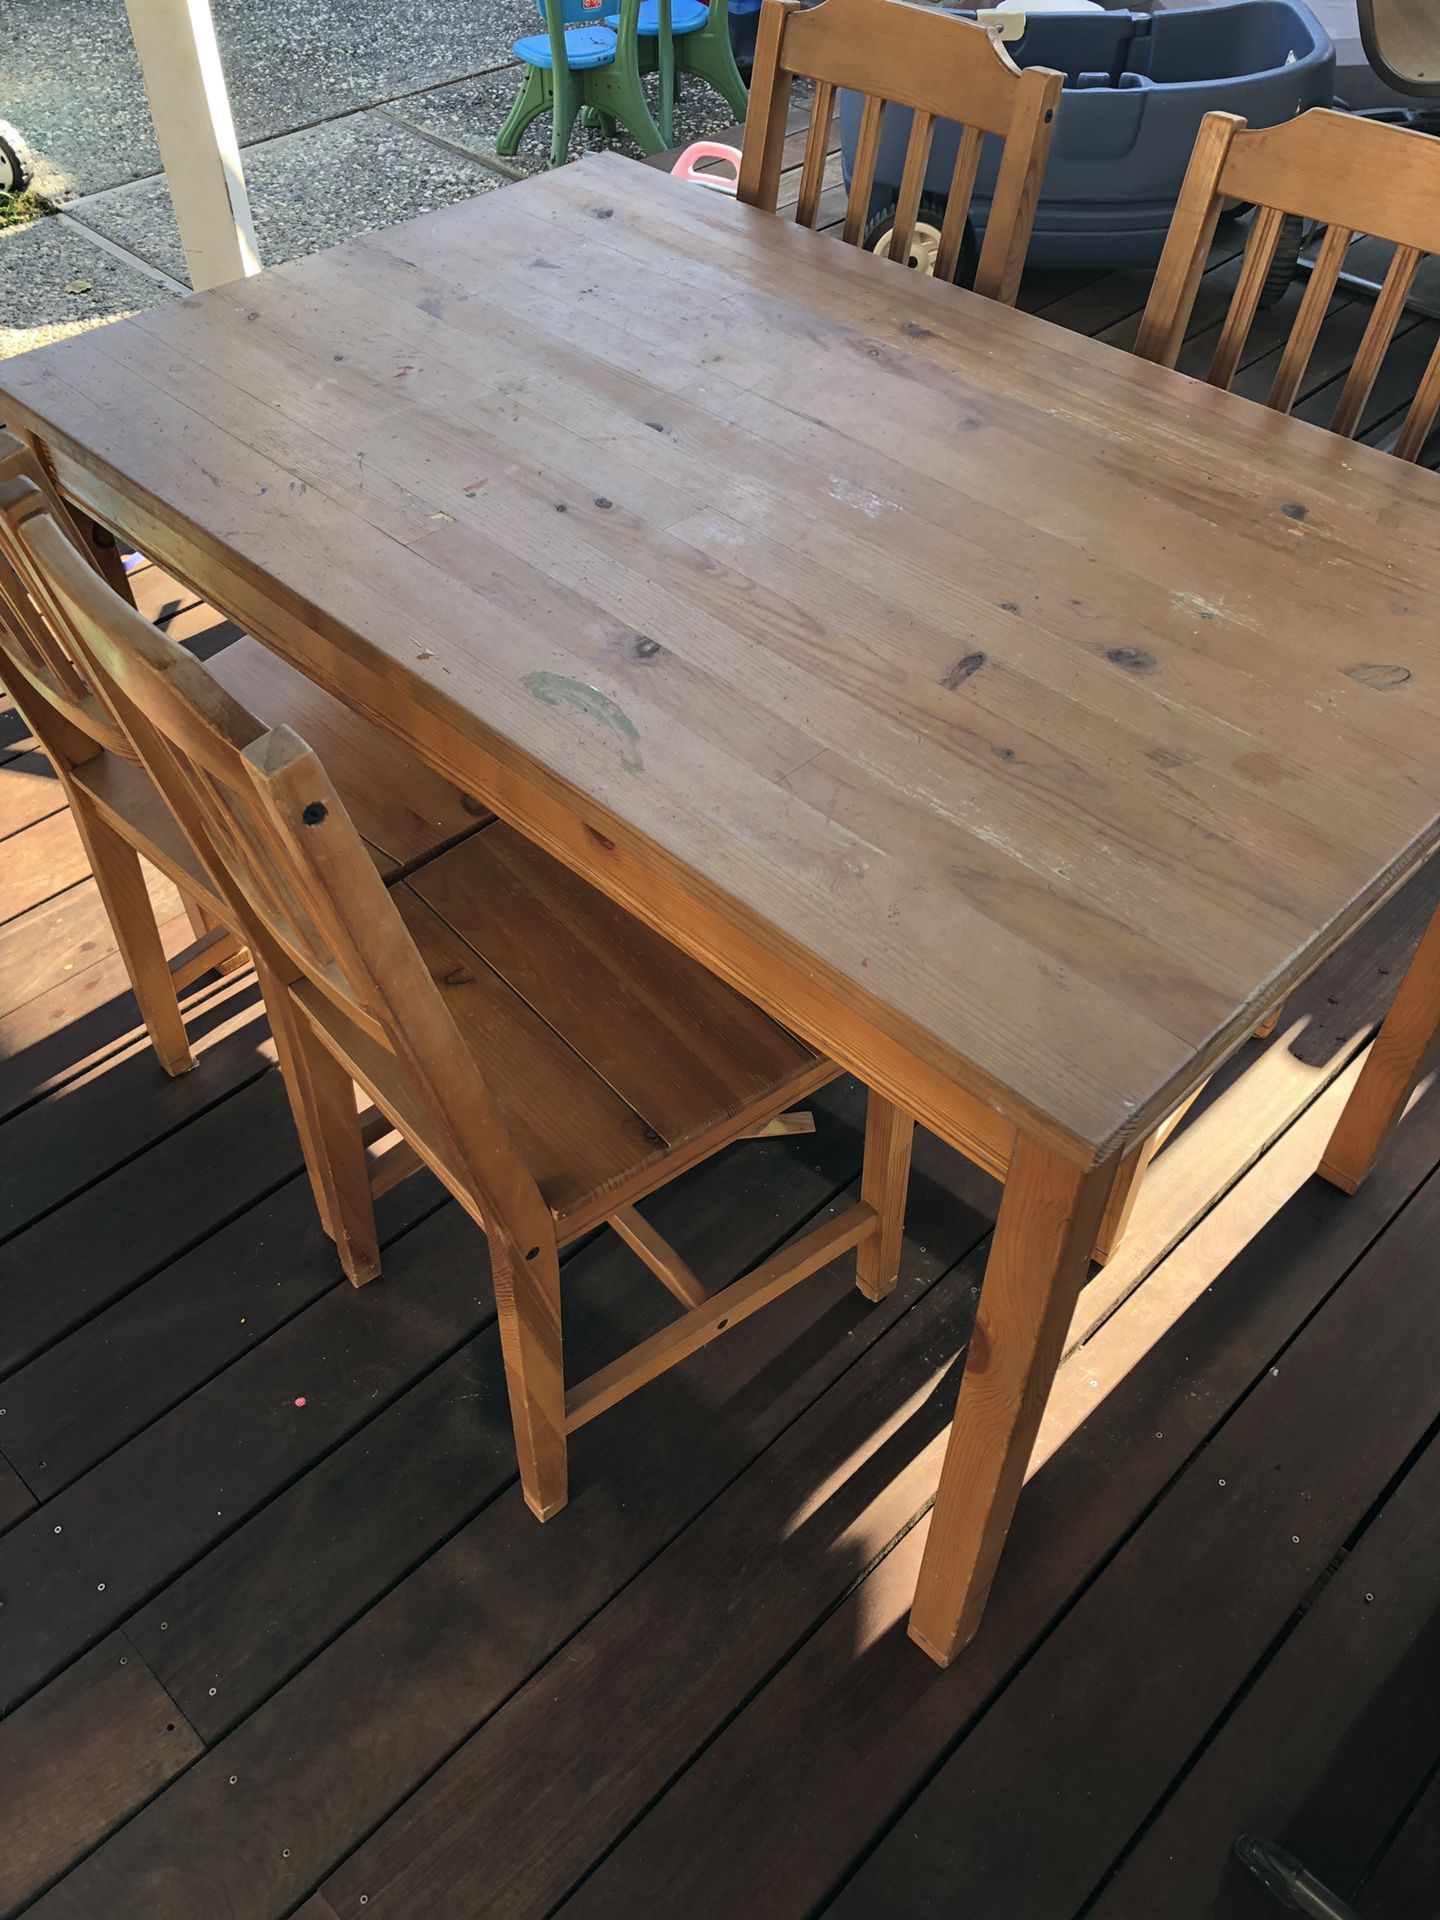 IKEA Pine Wood Kitchen/Activity Table with 4 Chairs